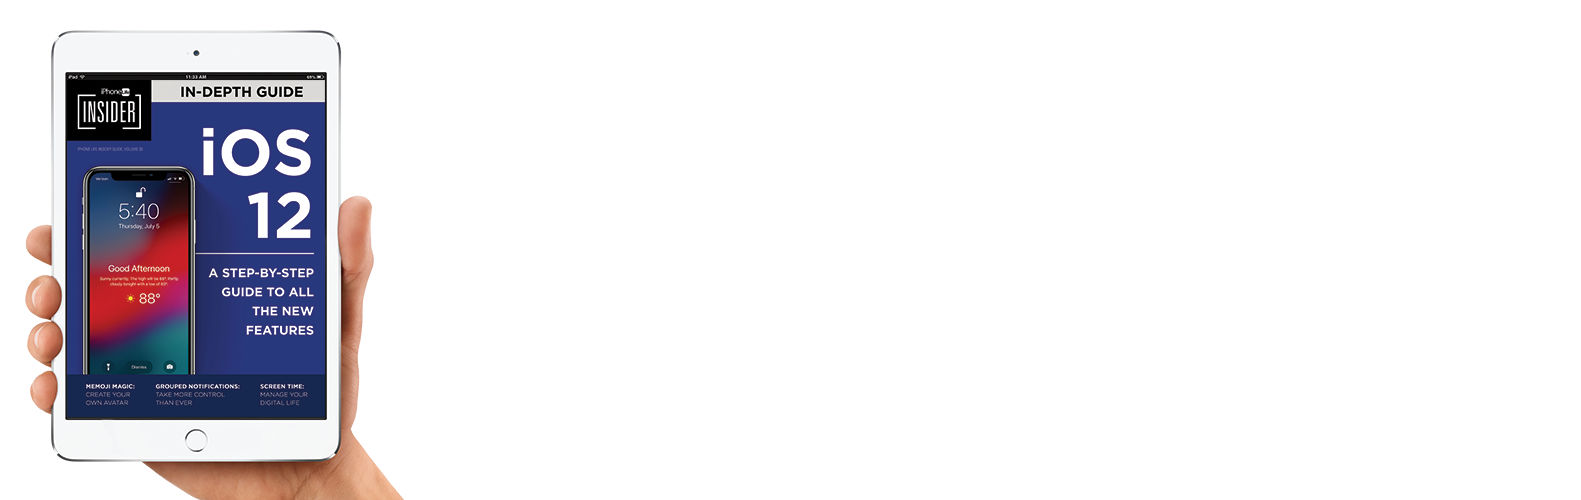 iOS 12 Guide - A Step-By-Step Guide to all the new features